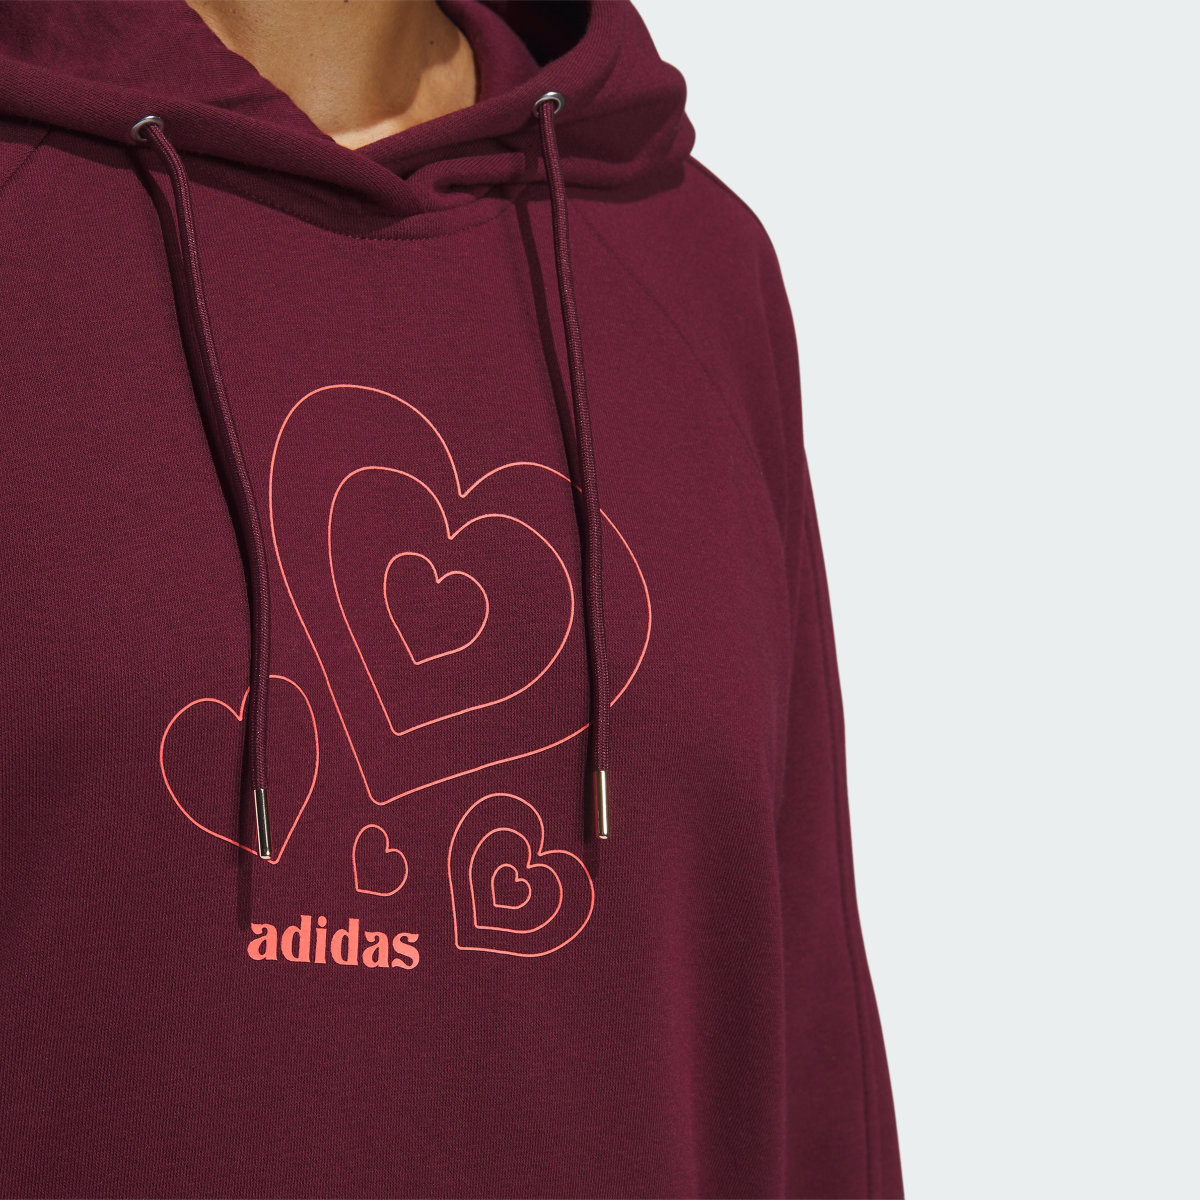 Adidas ALL SZN Valentine's Day Pullover Hoodie. 6